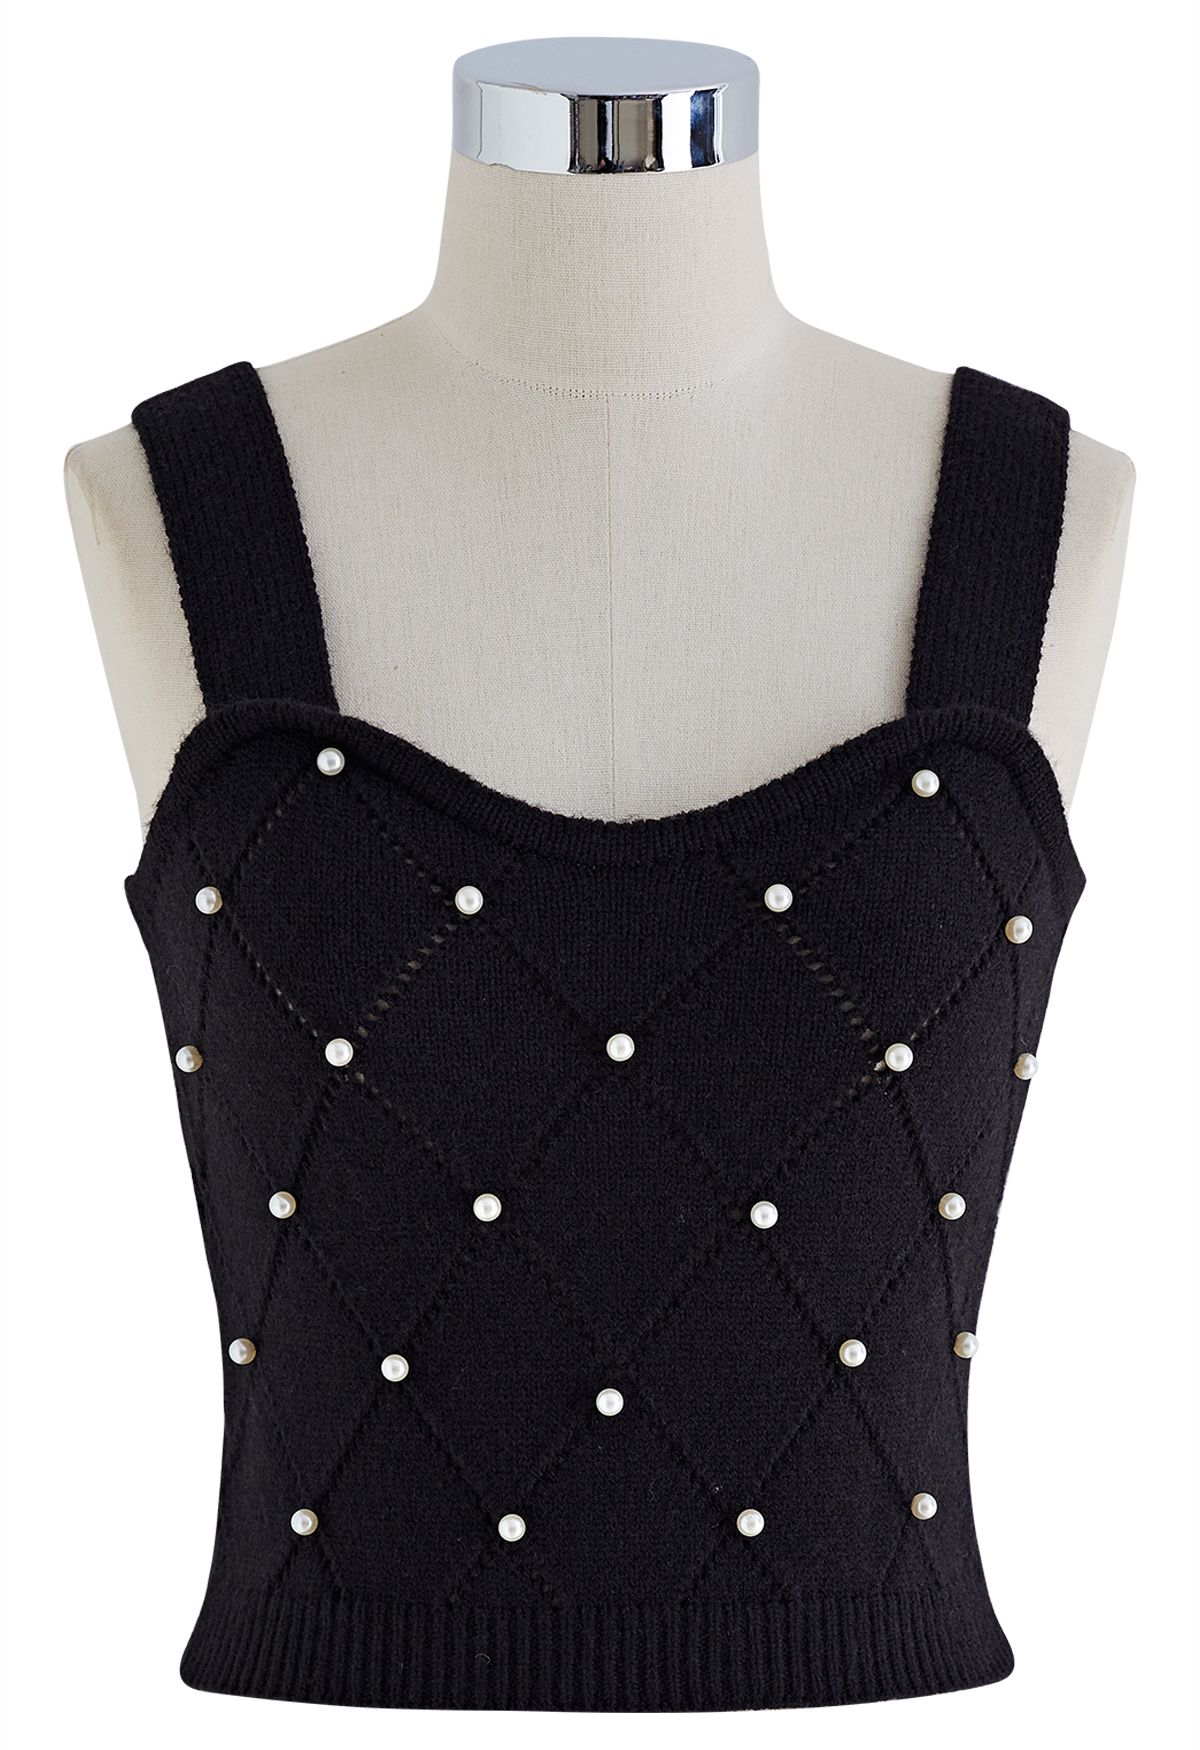 Pearly Diamond Knit Cami Top and Cardigan Set in Black